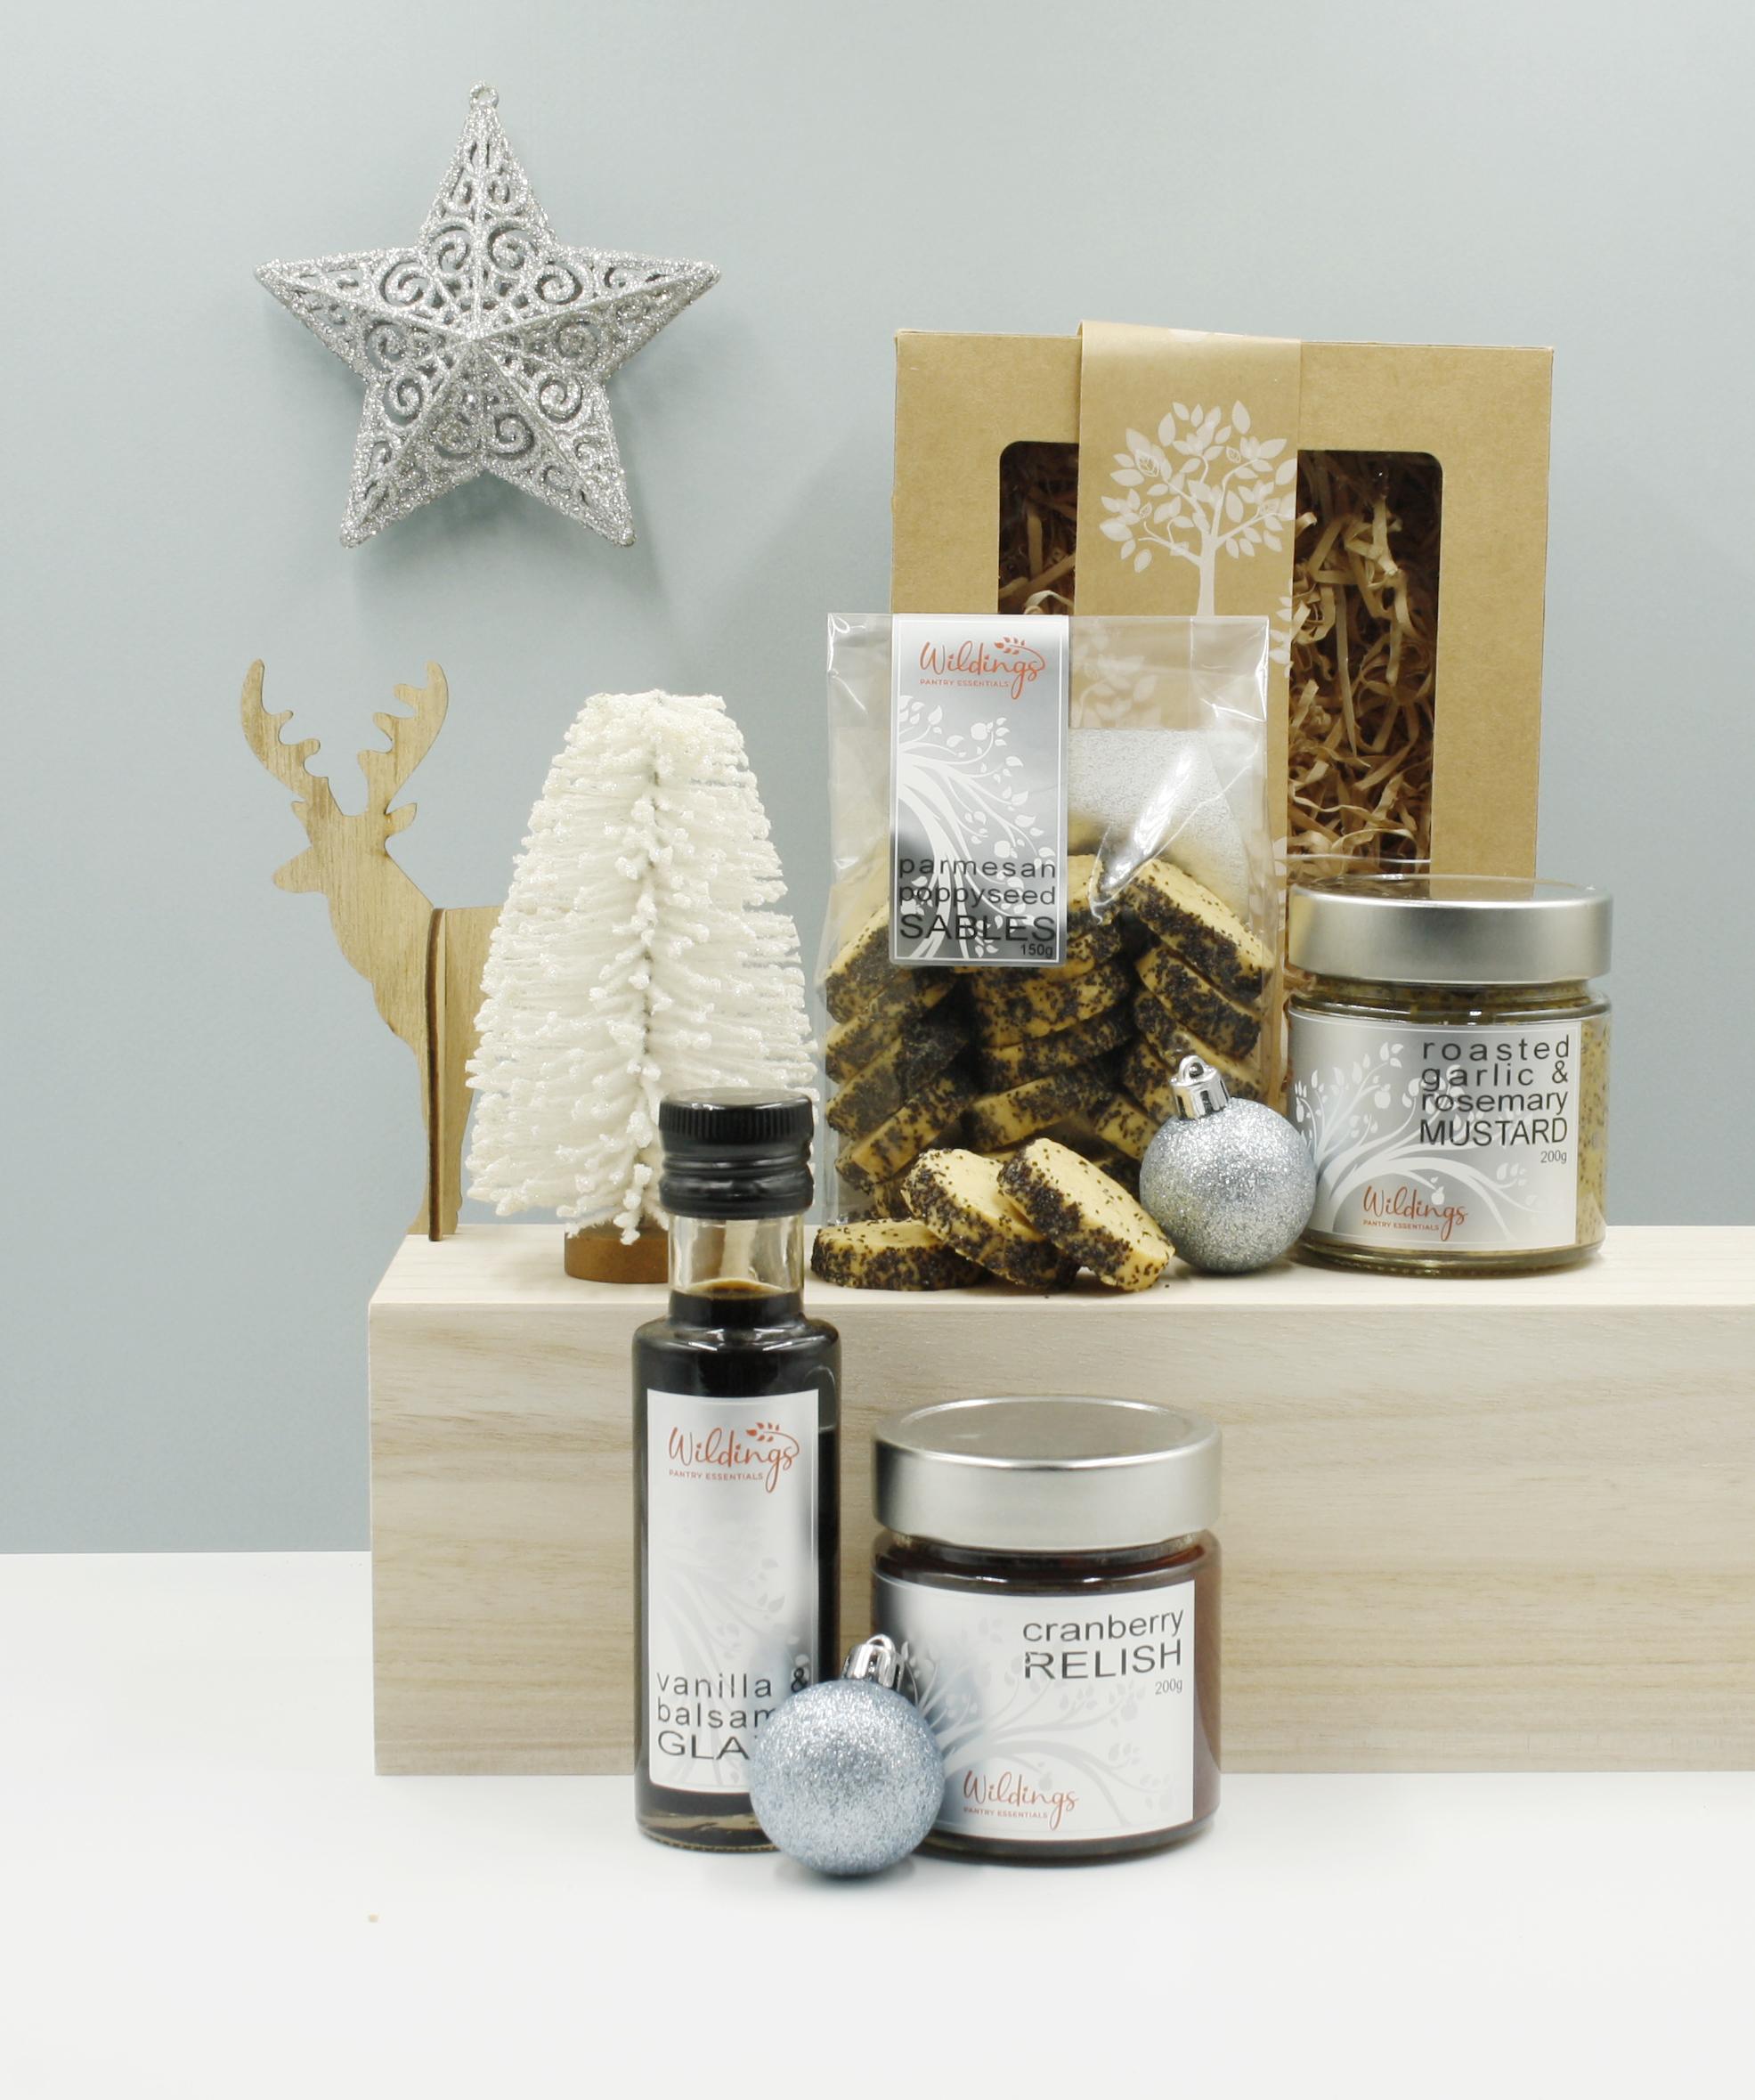 Savoury Little Wildings Christmas with Giftbox